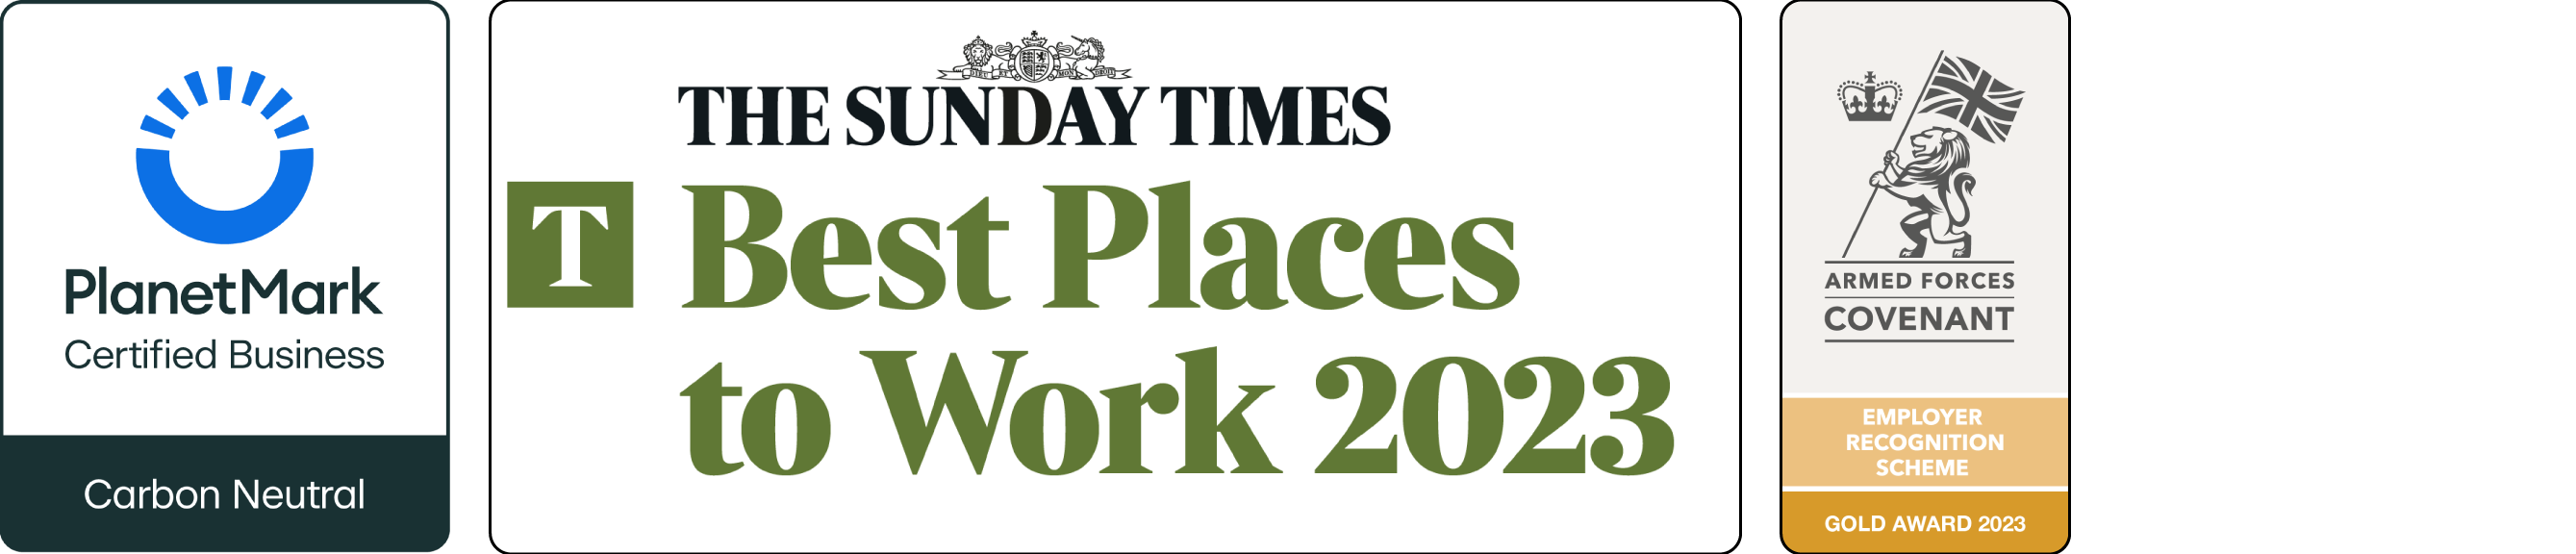 4 logos. Planet mark certified carbon neutral. Sunday Times best place to work. Top 5 best companies to work for in construction and engineering. Armed forces covenant gold.